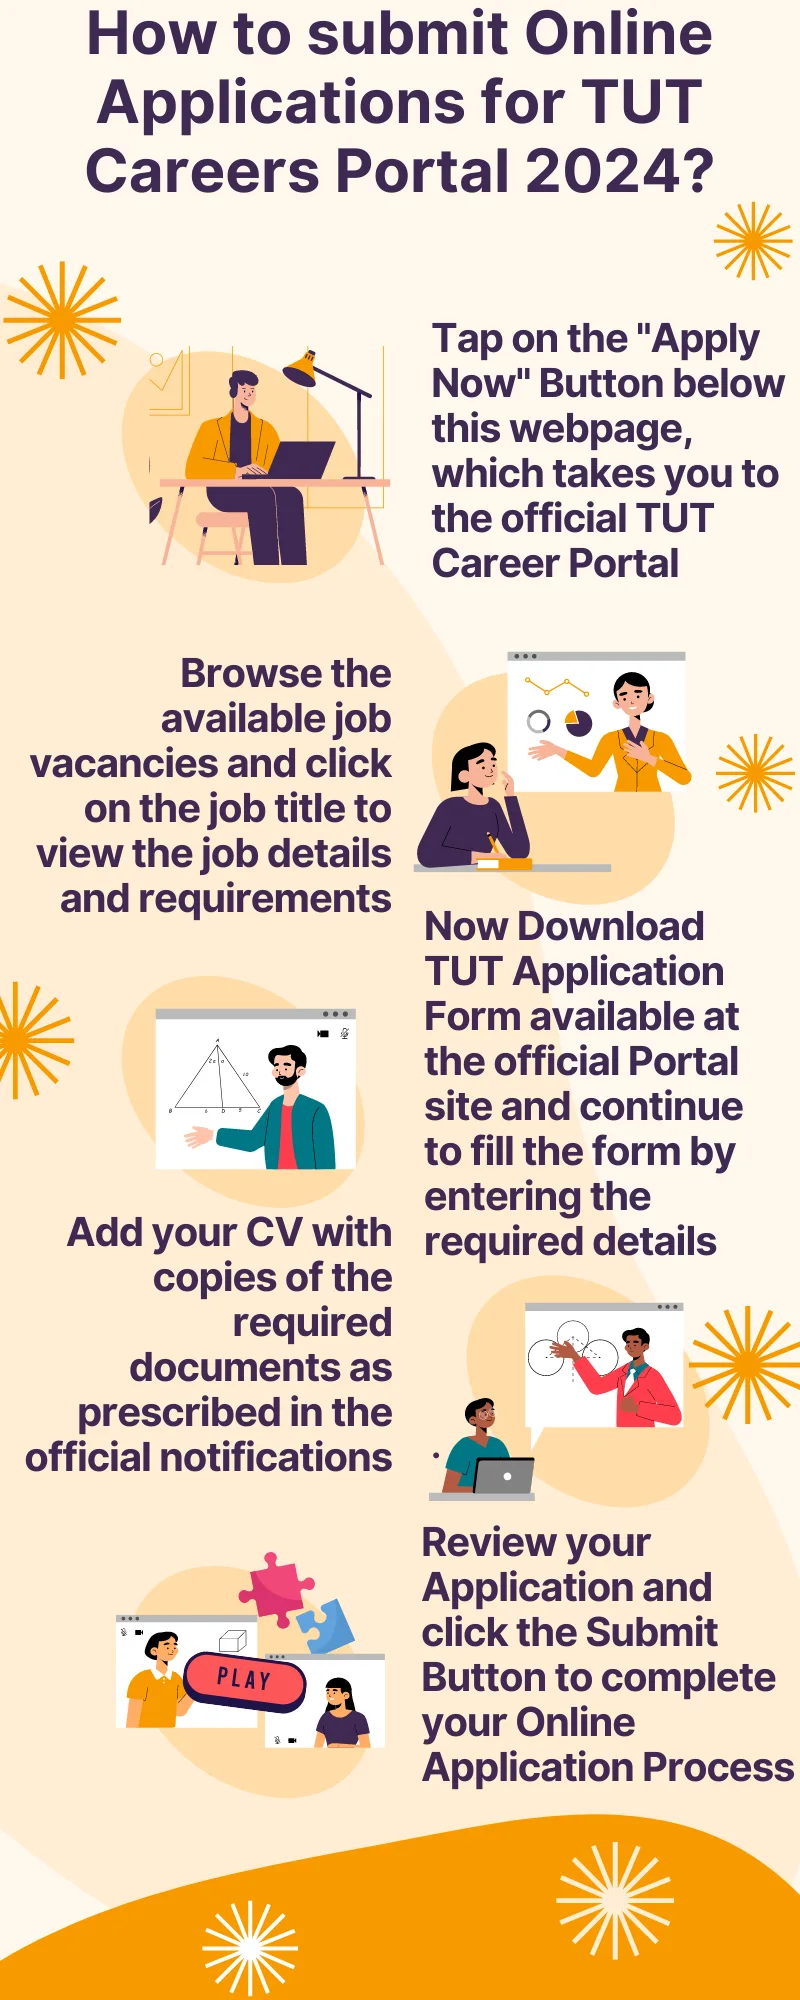 How to submit Online Applications for TUT Careers Portal 2024